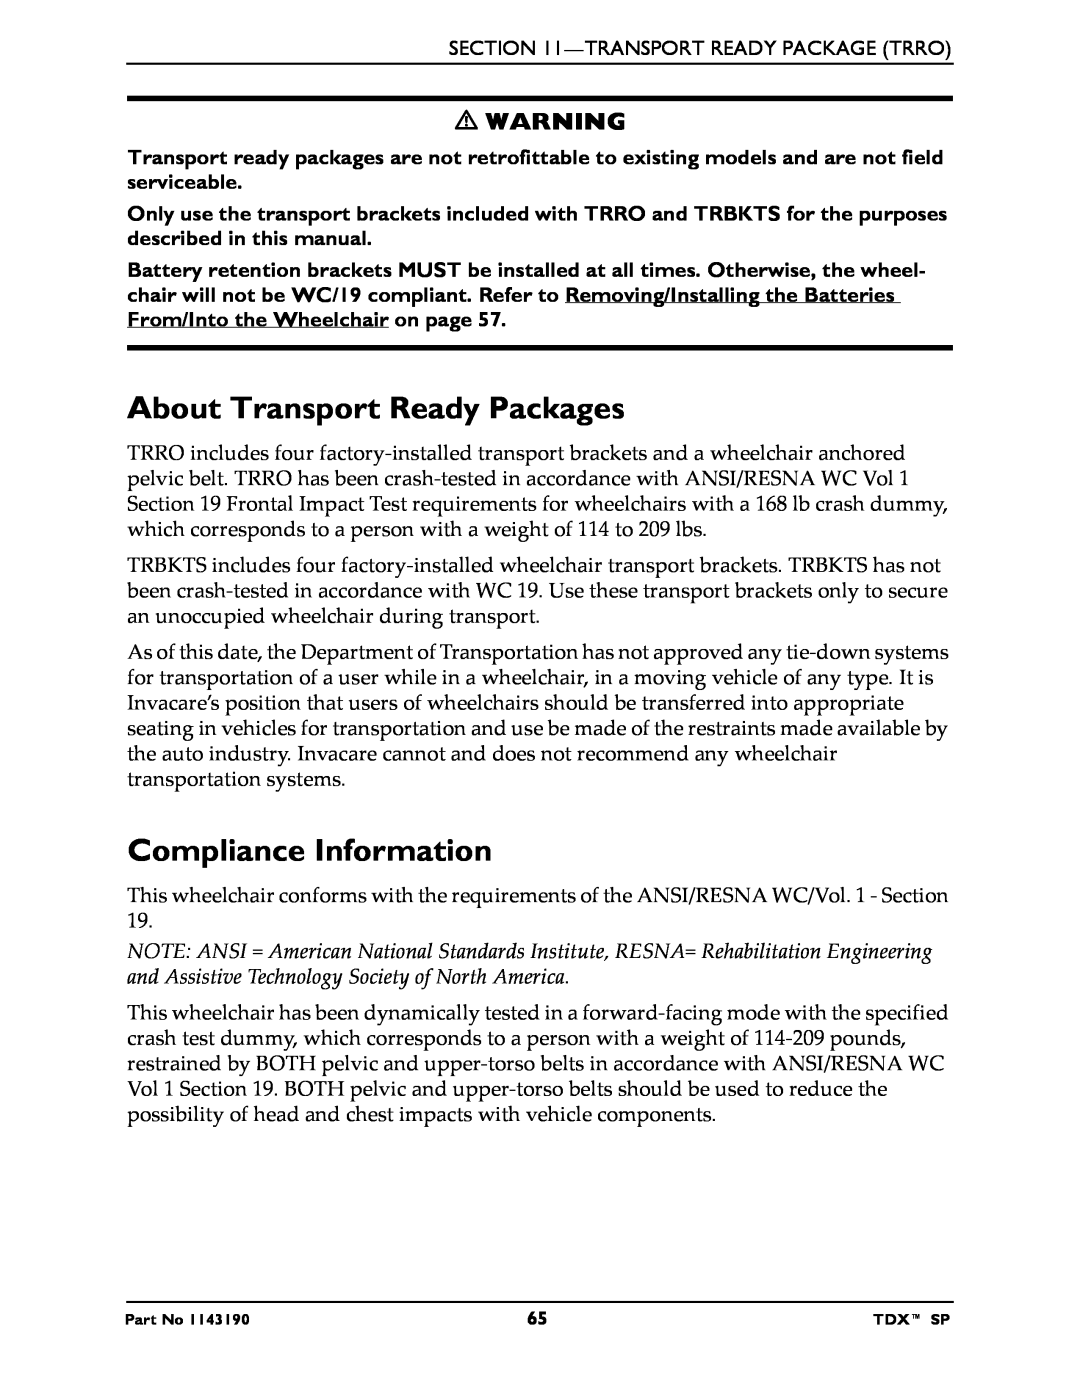 Invacare SP manual About Transport Ready Packages, Compliance Information 